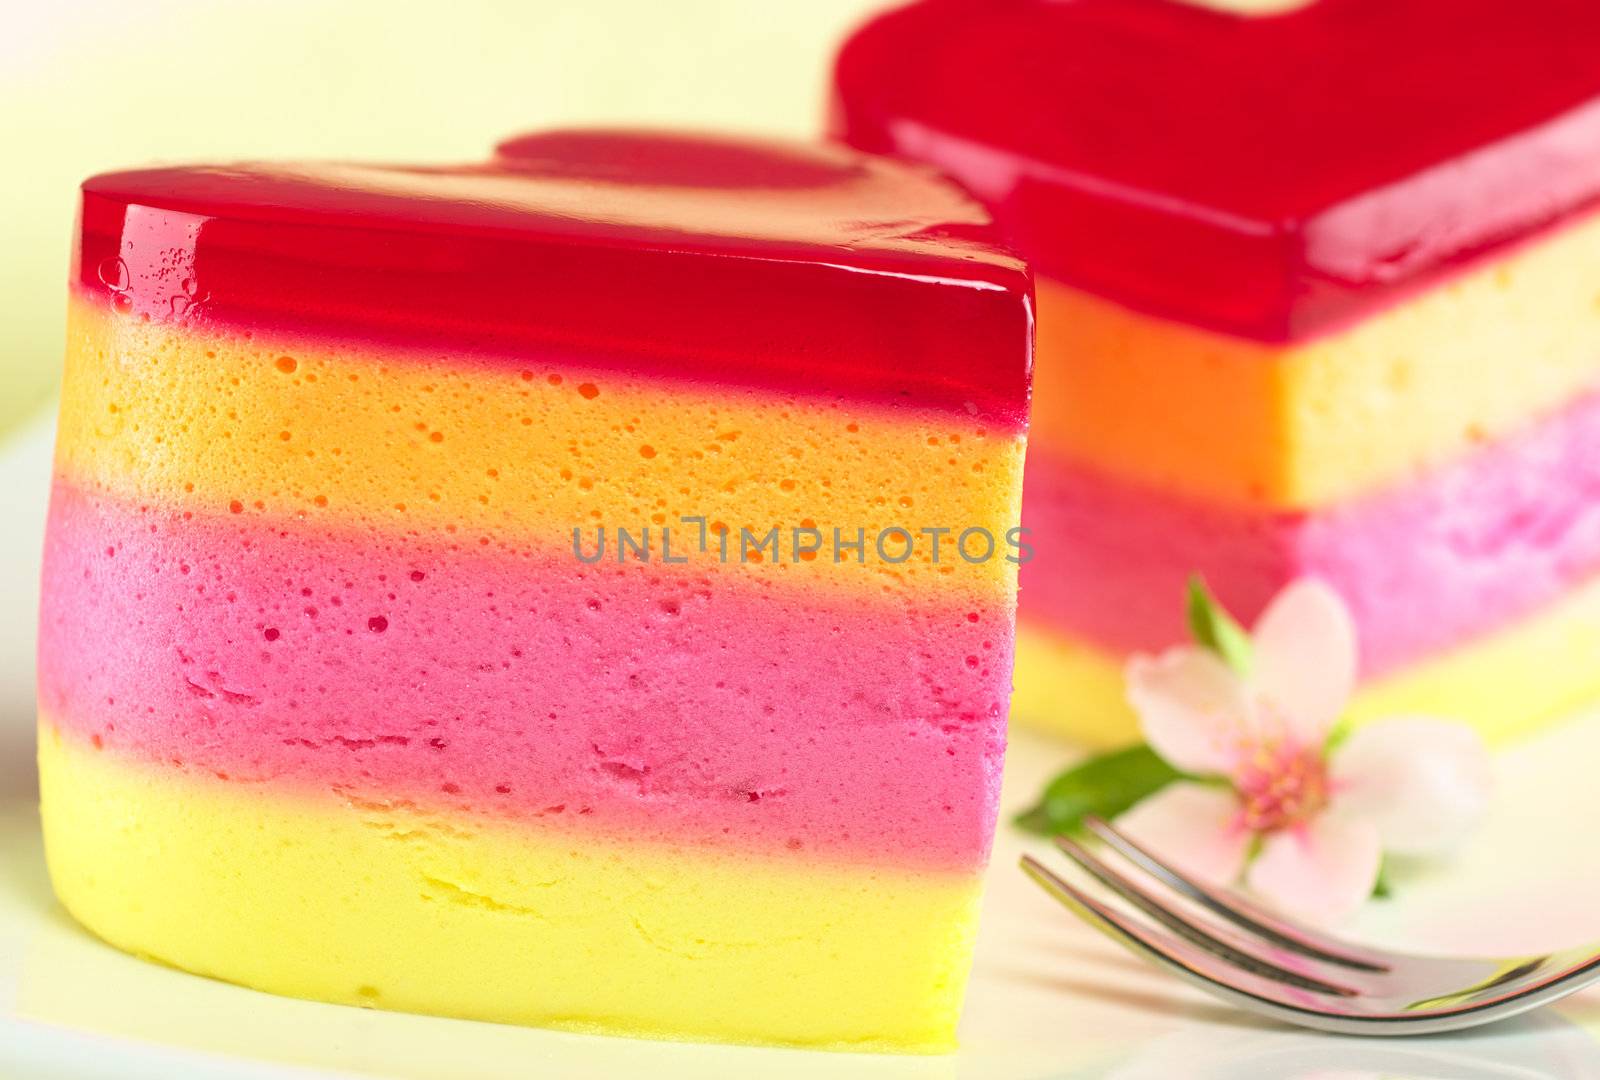 Colorful Peruvian heart-shaped jelly-pudding cakes called Torta Helada with a peach blossom and a fork on the plate (Selective Focus, Focus on the front surface of the left cake)